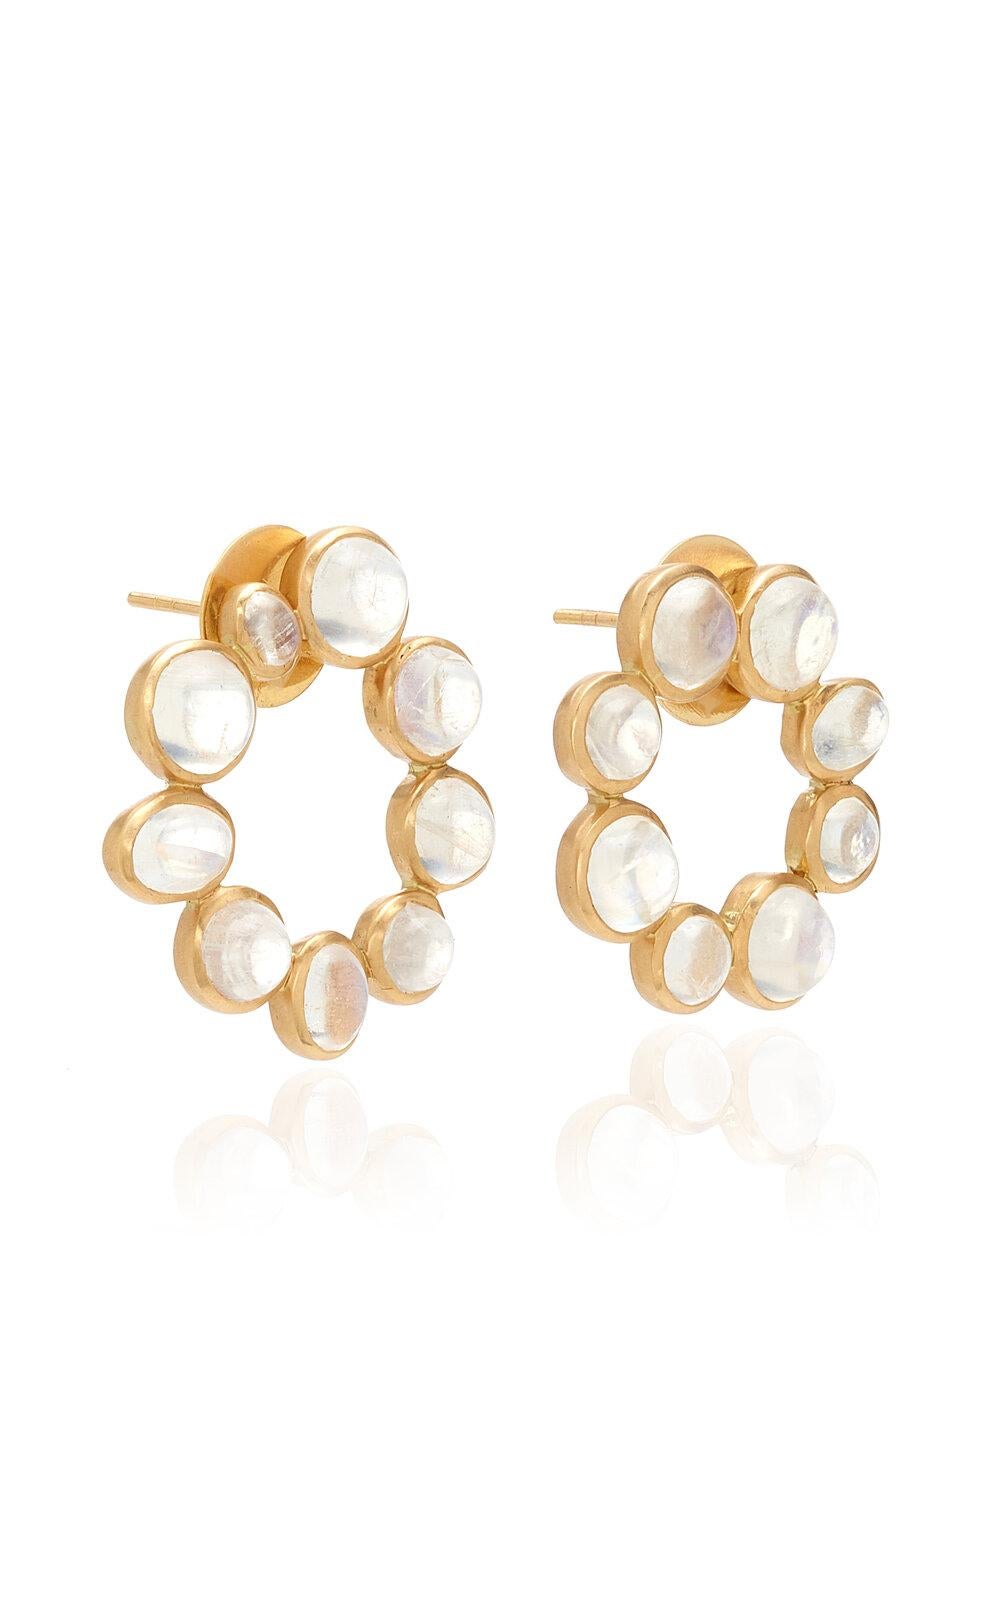 OUROBOROS' 'Round and Round,' cabochon rainbow moonstones set in 18kt gold.

OUROBOROS’ commitment to using only the most unique stones set in 18 or 24 Karat gold, is matched only to Olivia’s commitment to the conditions and treatment of her